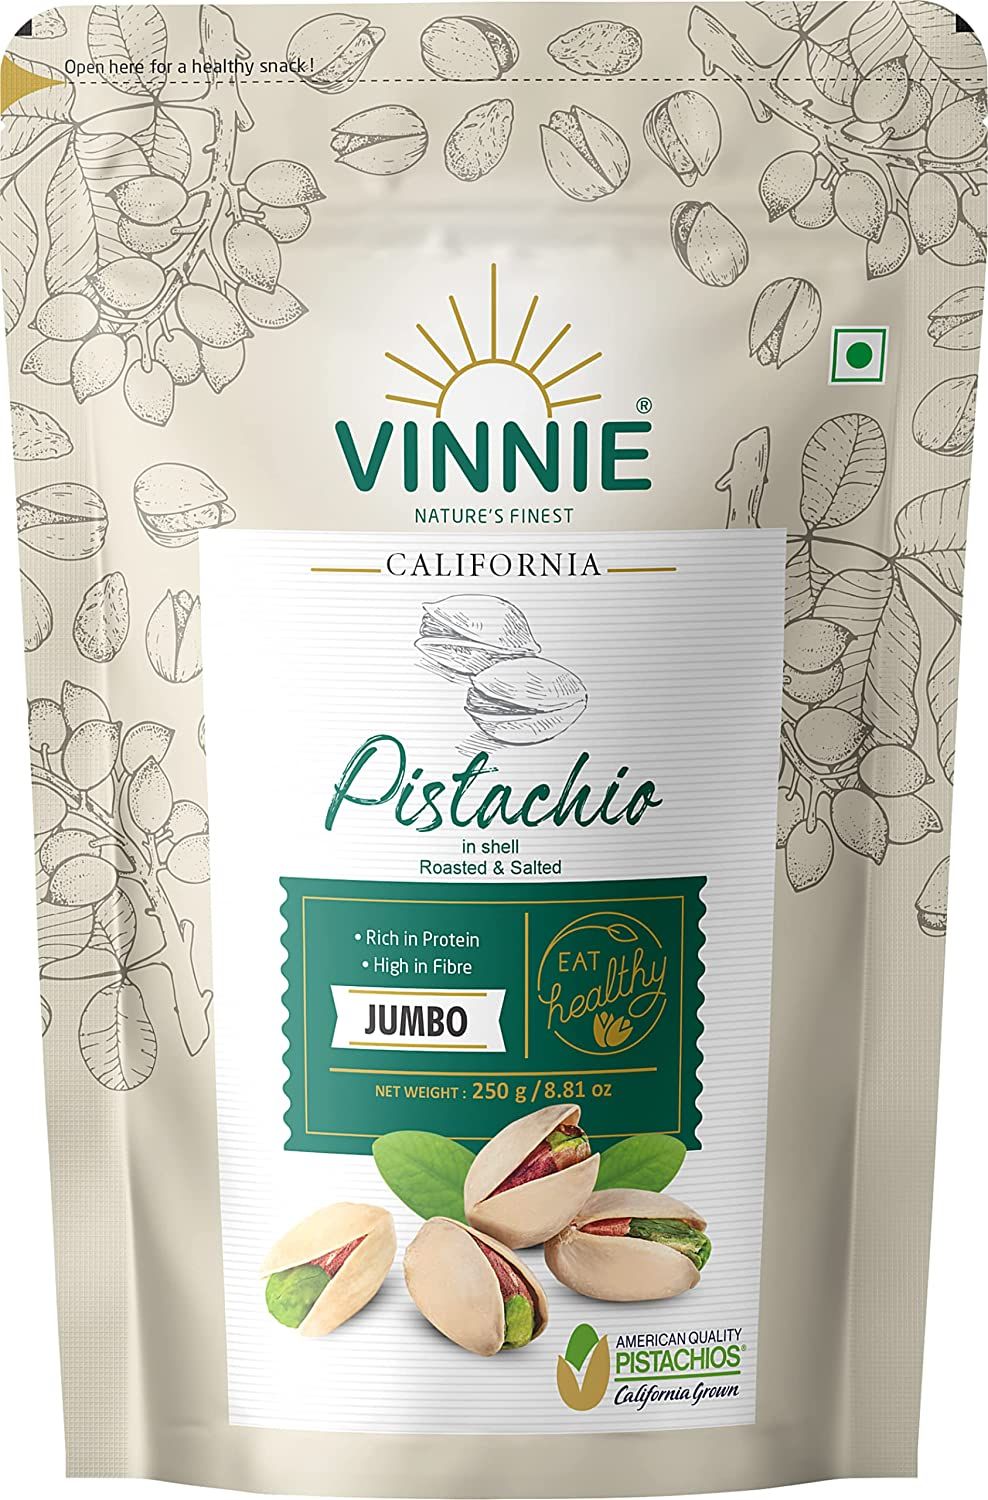 Vinnie American Jumbo Inshell Pistachios Natural Pista Fruit Roasted and Salted Pista with Shell Image